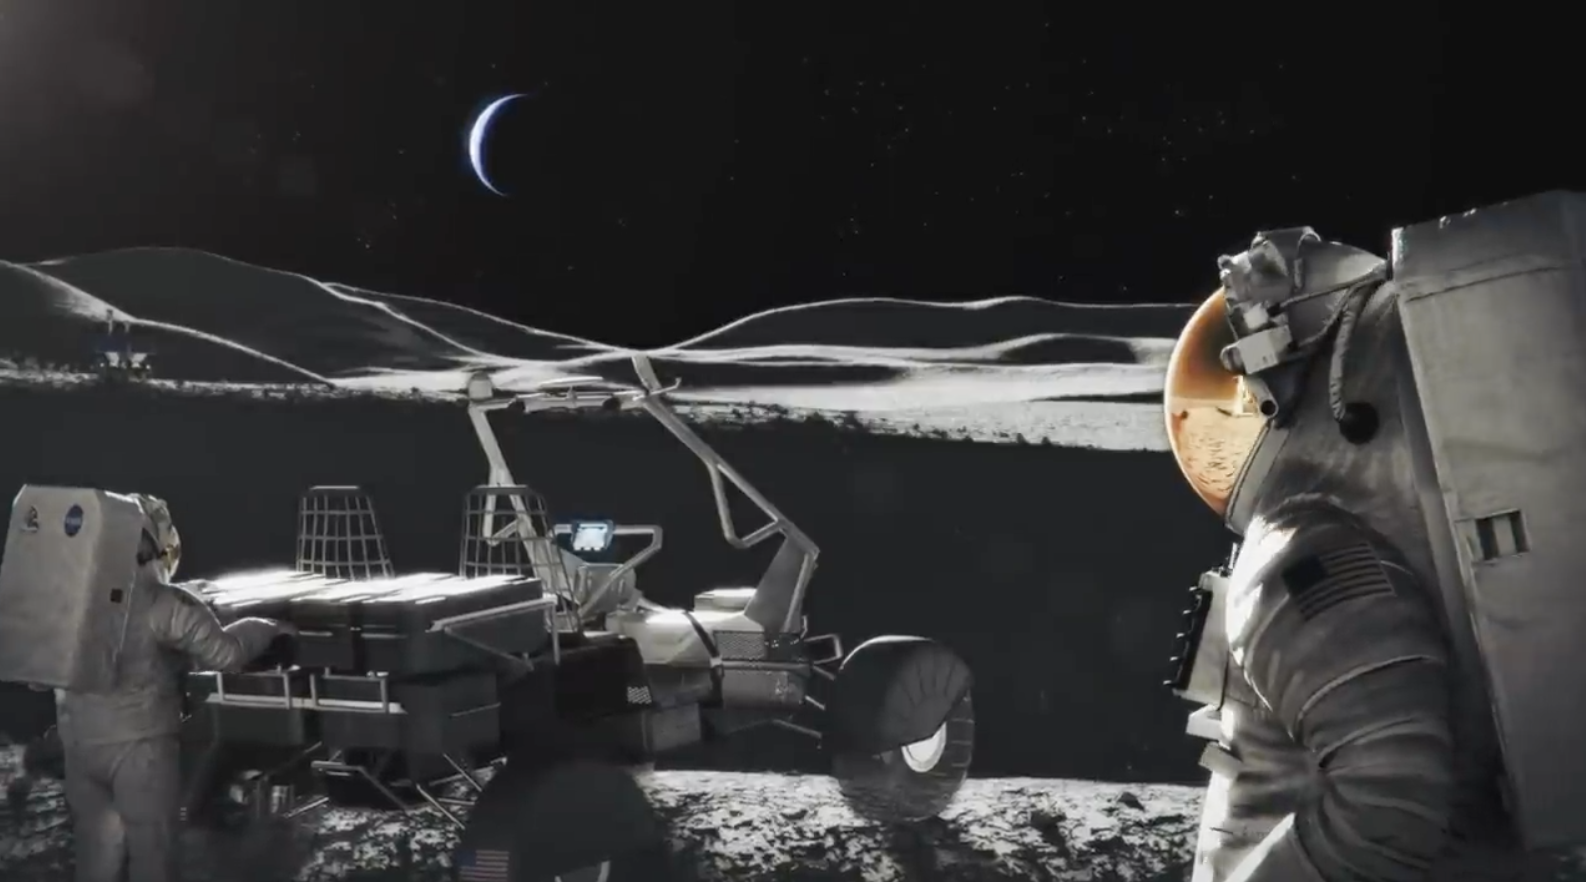 Spacesuited astronauts, next to lunar rover, on stark lunar surface, with Earth in the sky.